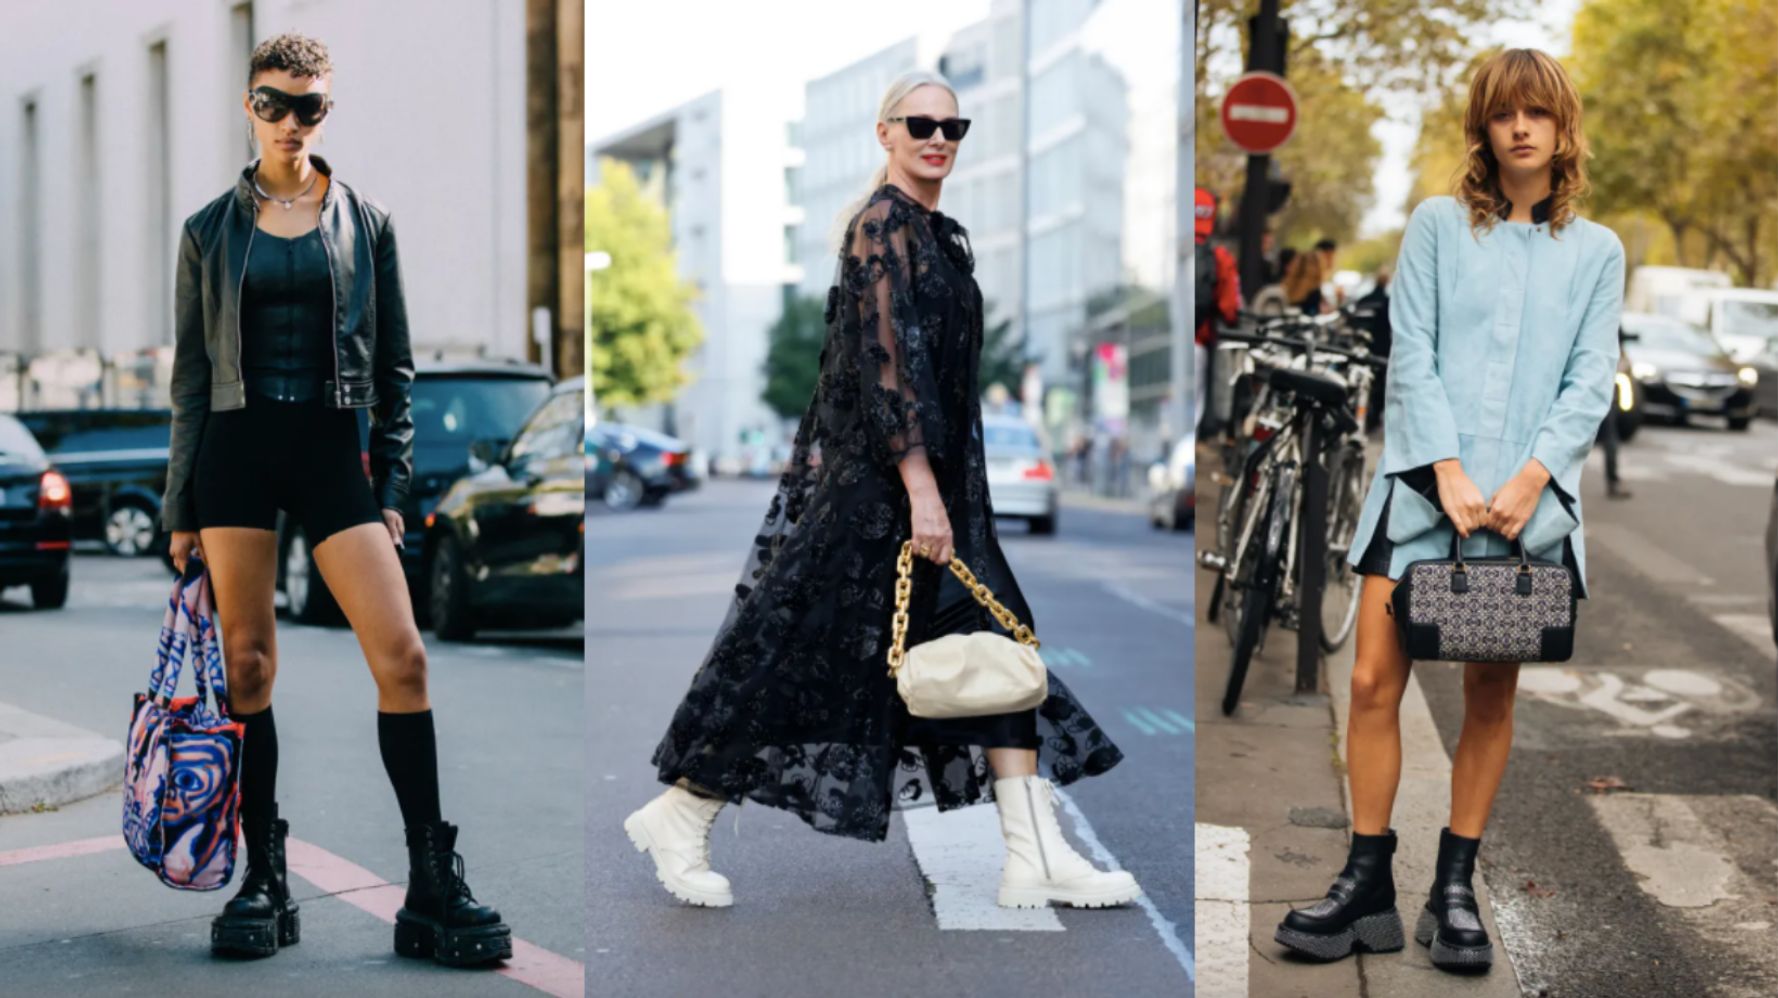 Combat boots are back and we want to wear them everyday